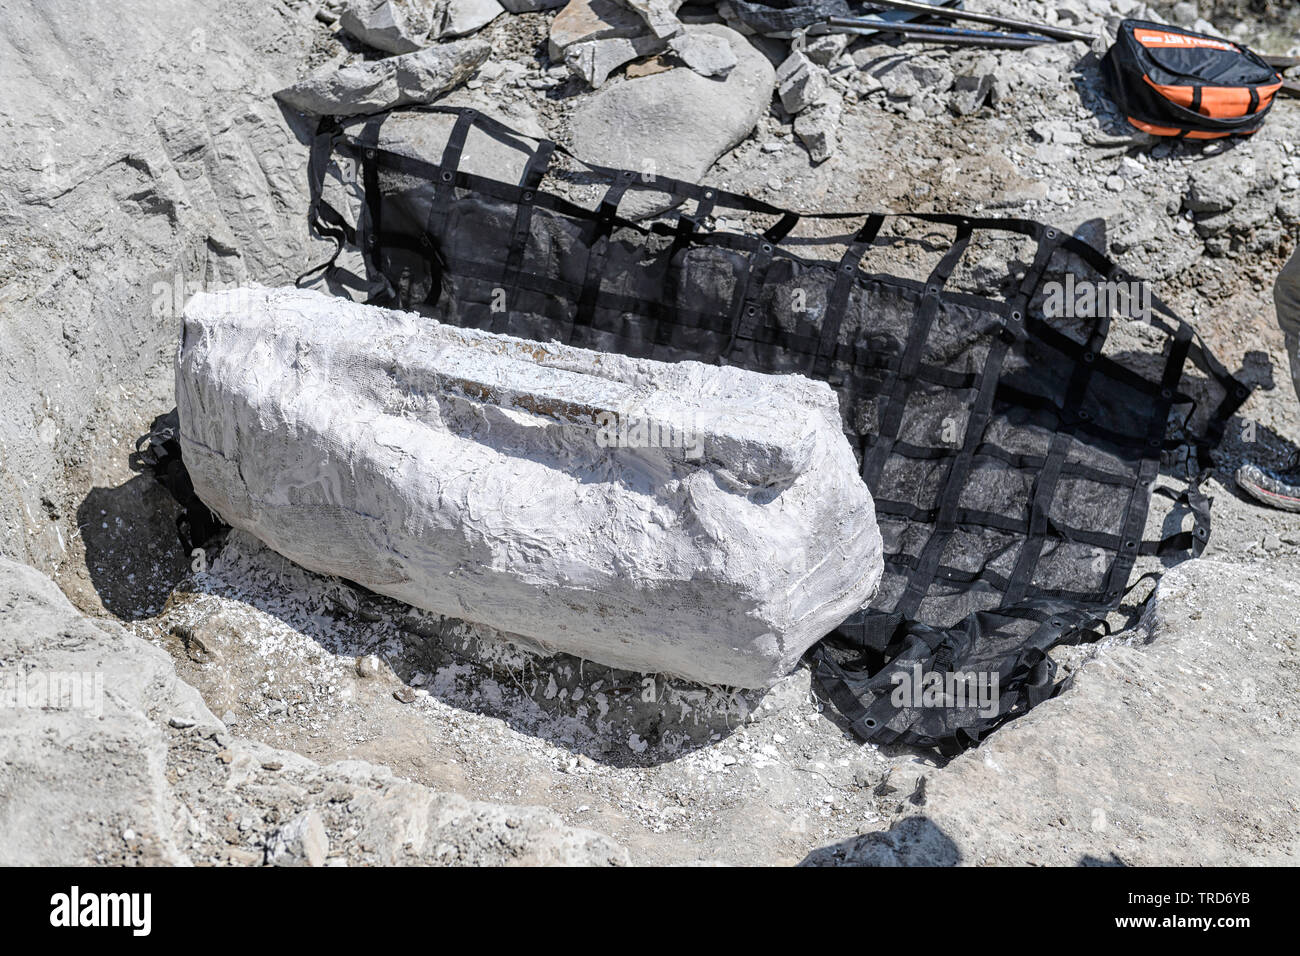 Fossilized femur bone of a duck-billed dinosaur (hadrosaur), wrapped in a protected plaster jacket ready for transport to the Tyrrell Museum, Canada Stock Photo